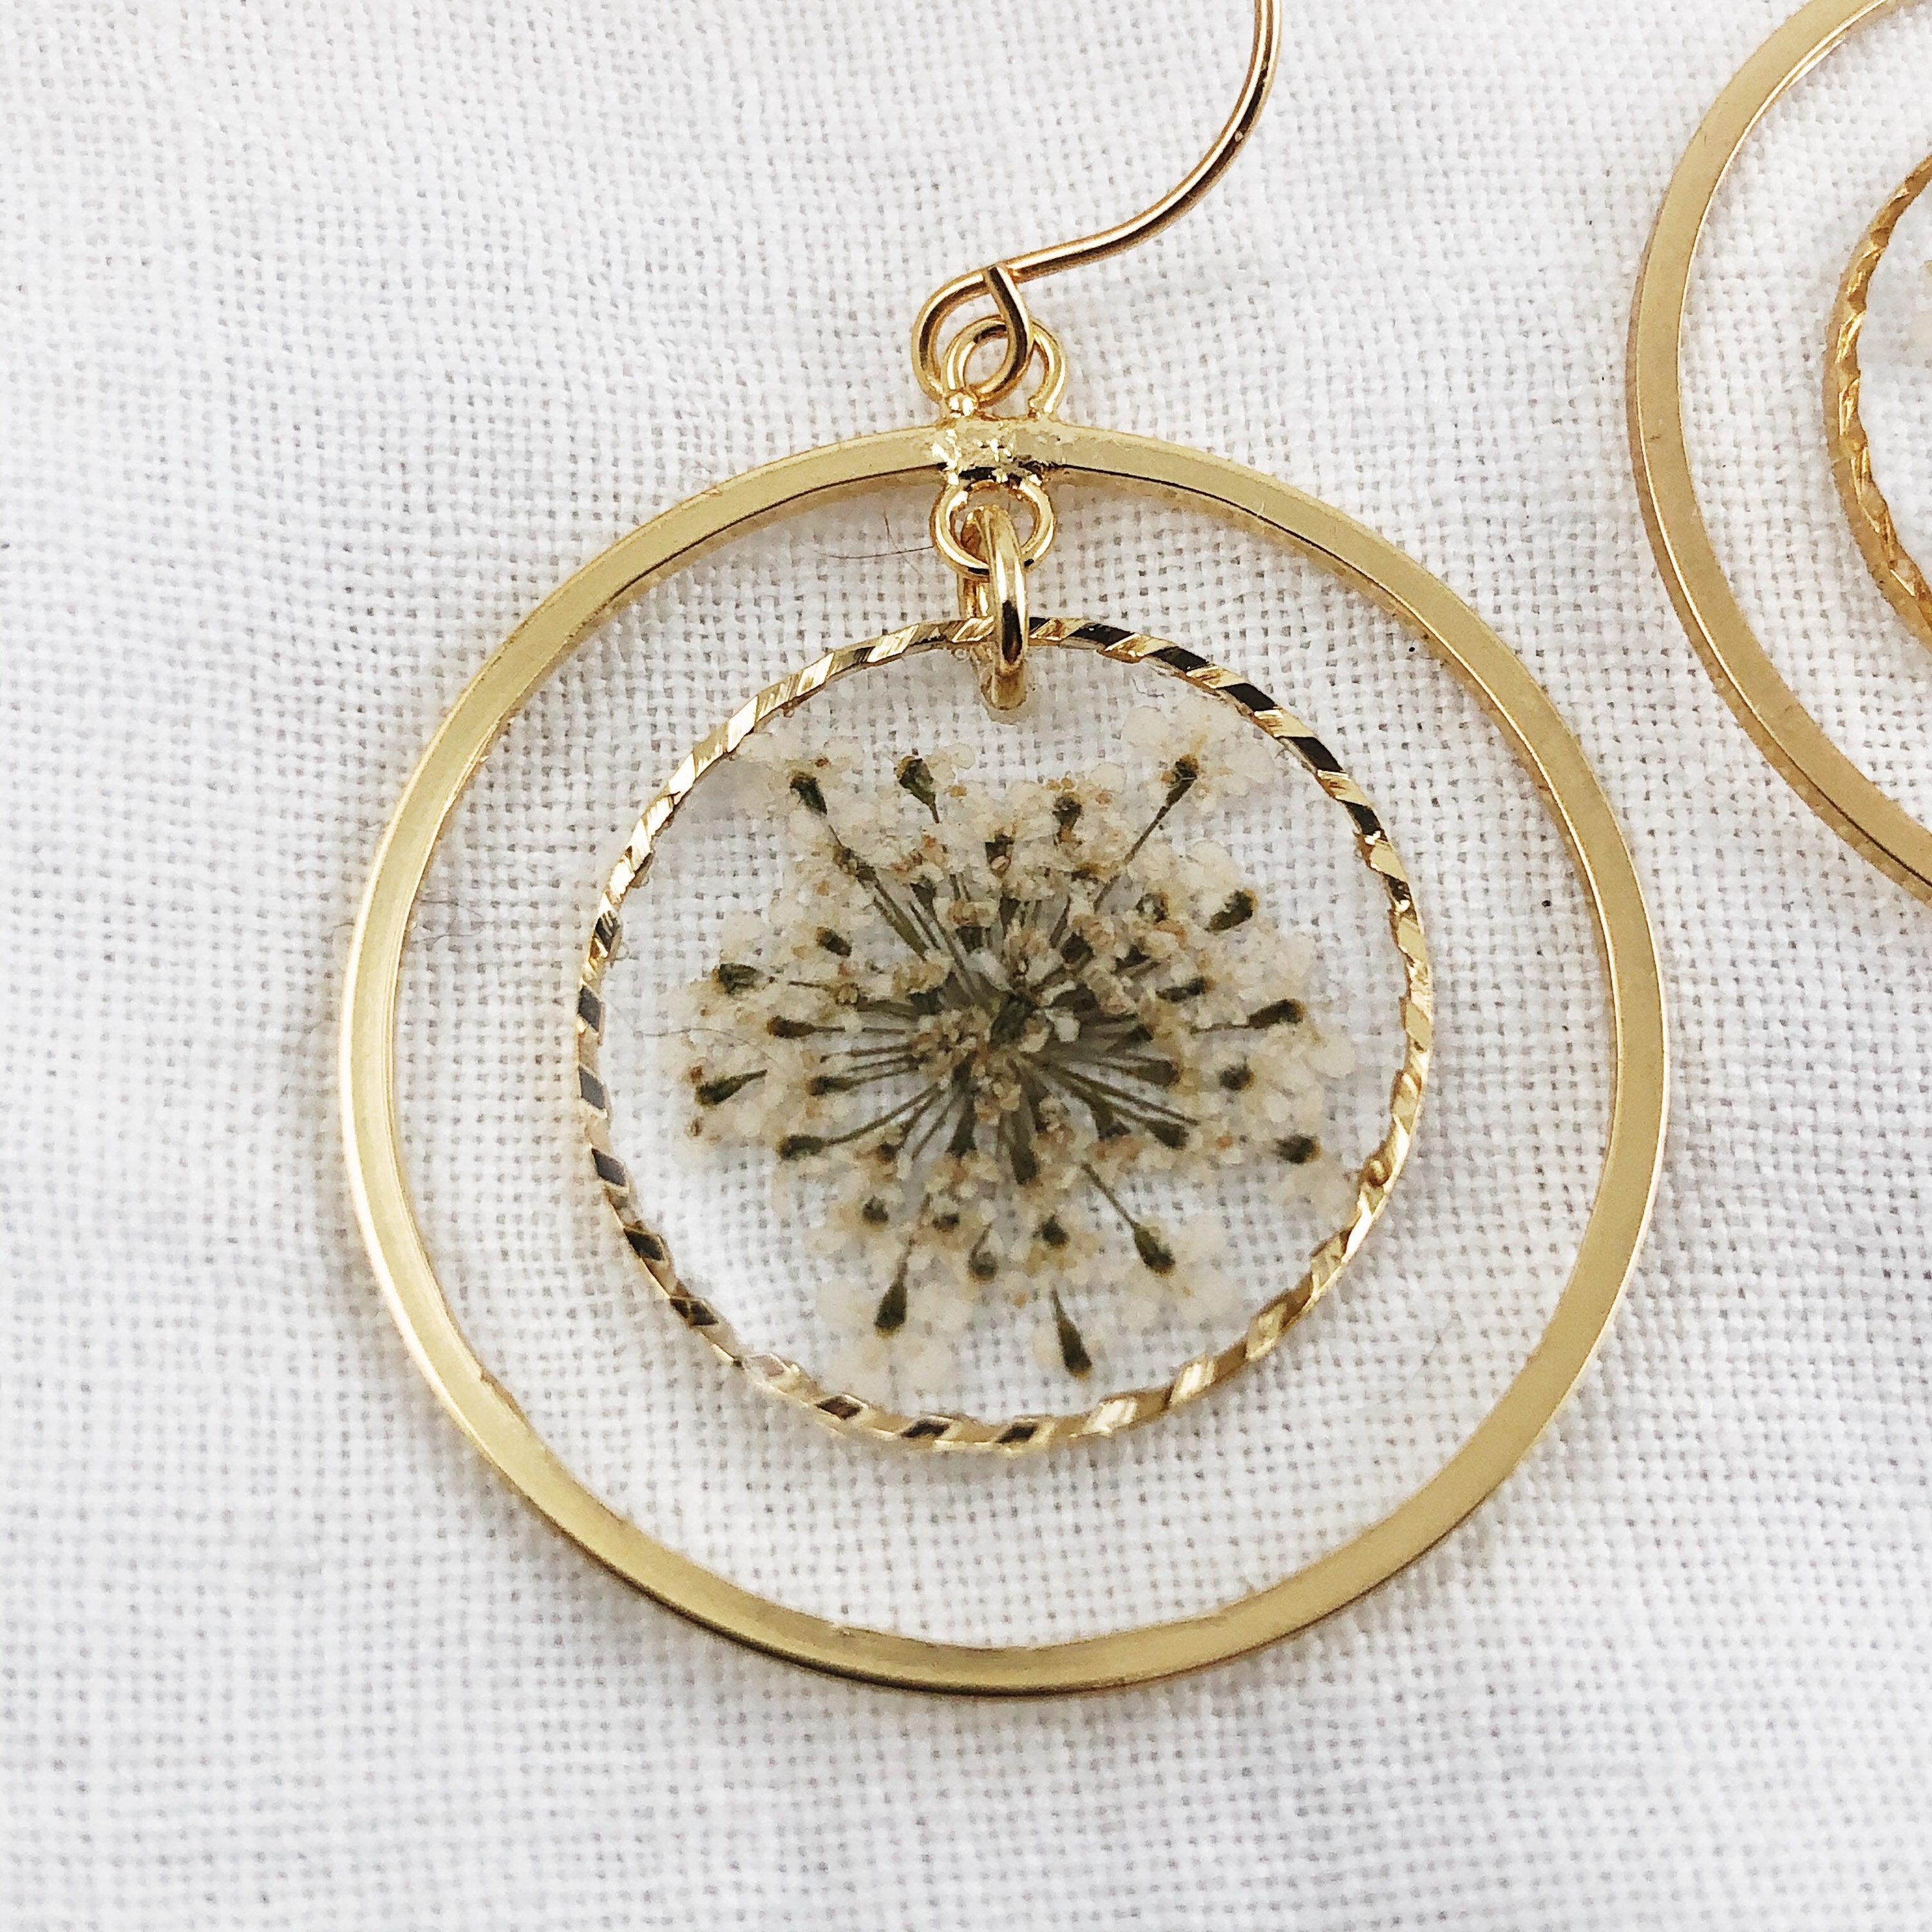 Queen Anne - Classic Gold Earrings with Pressed Flowers